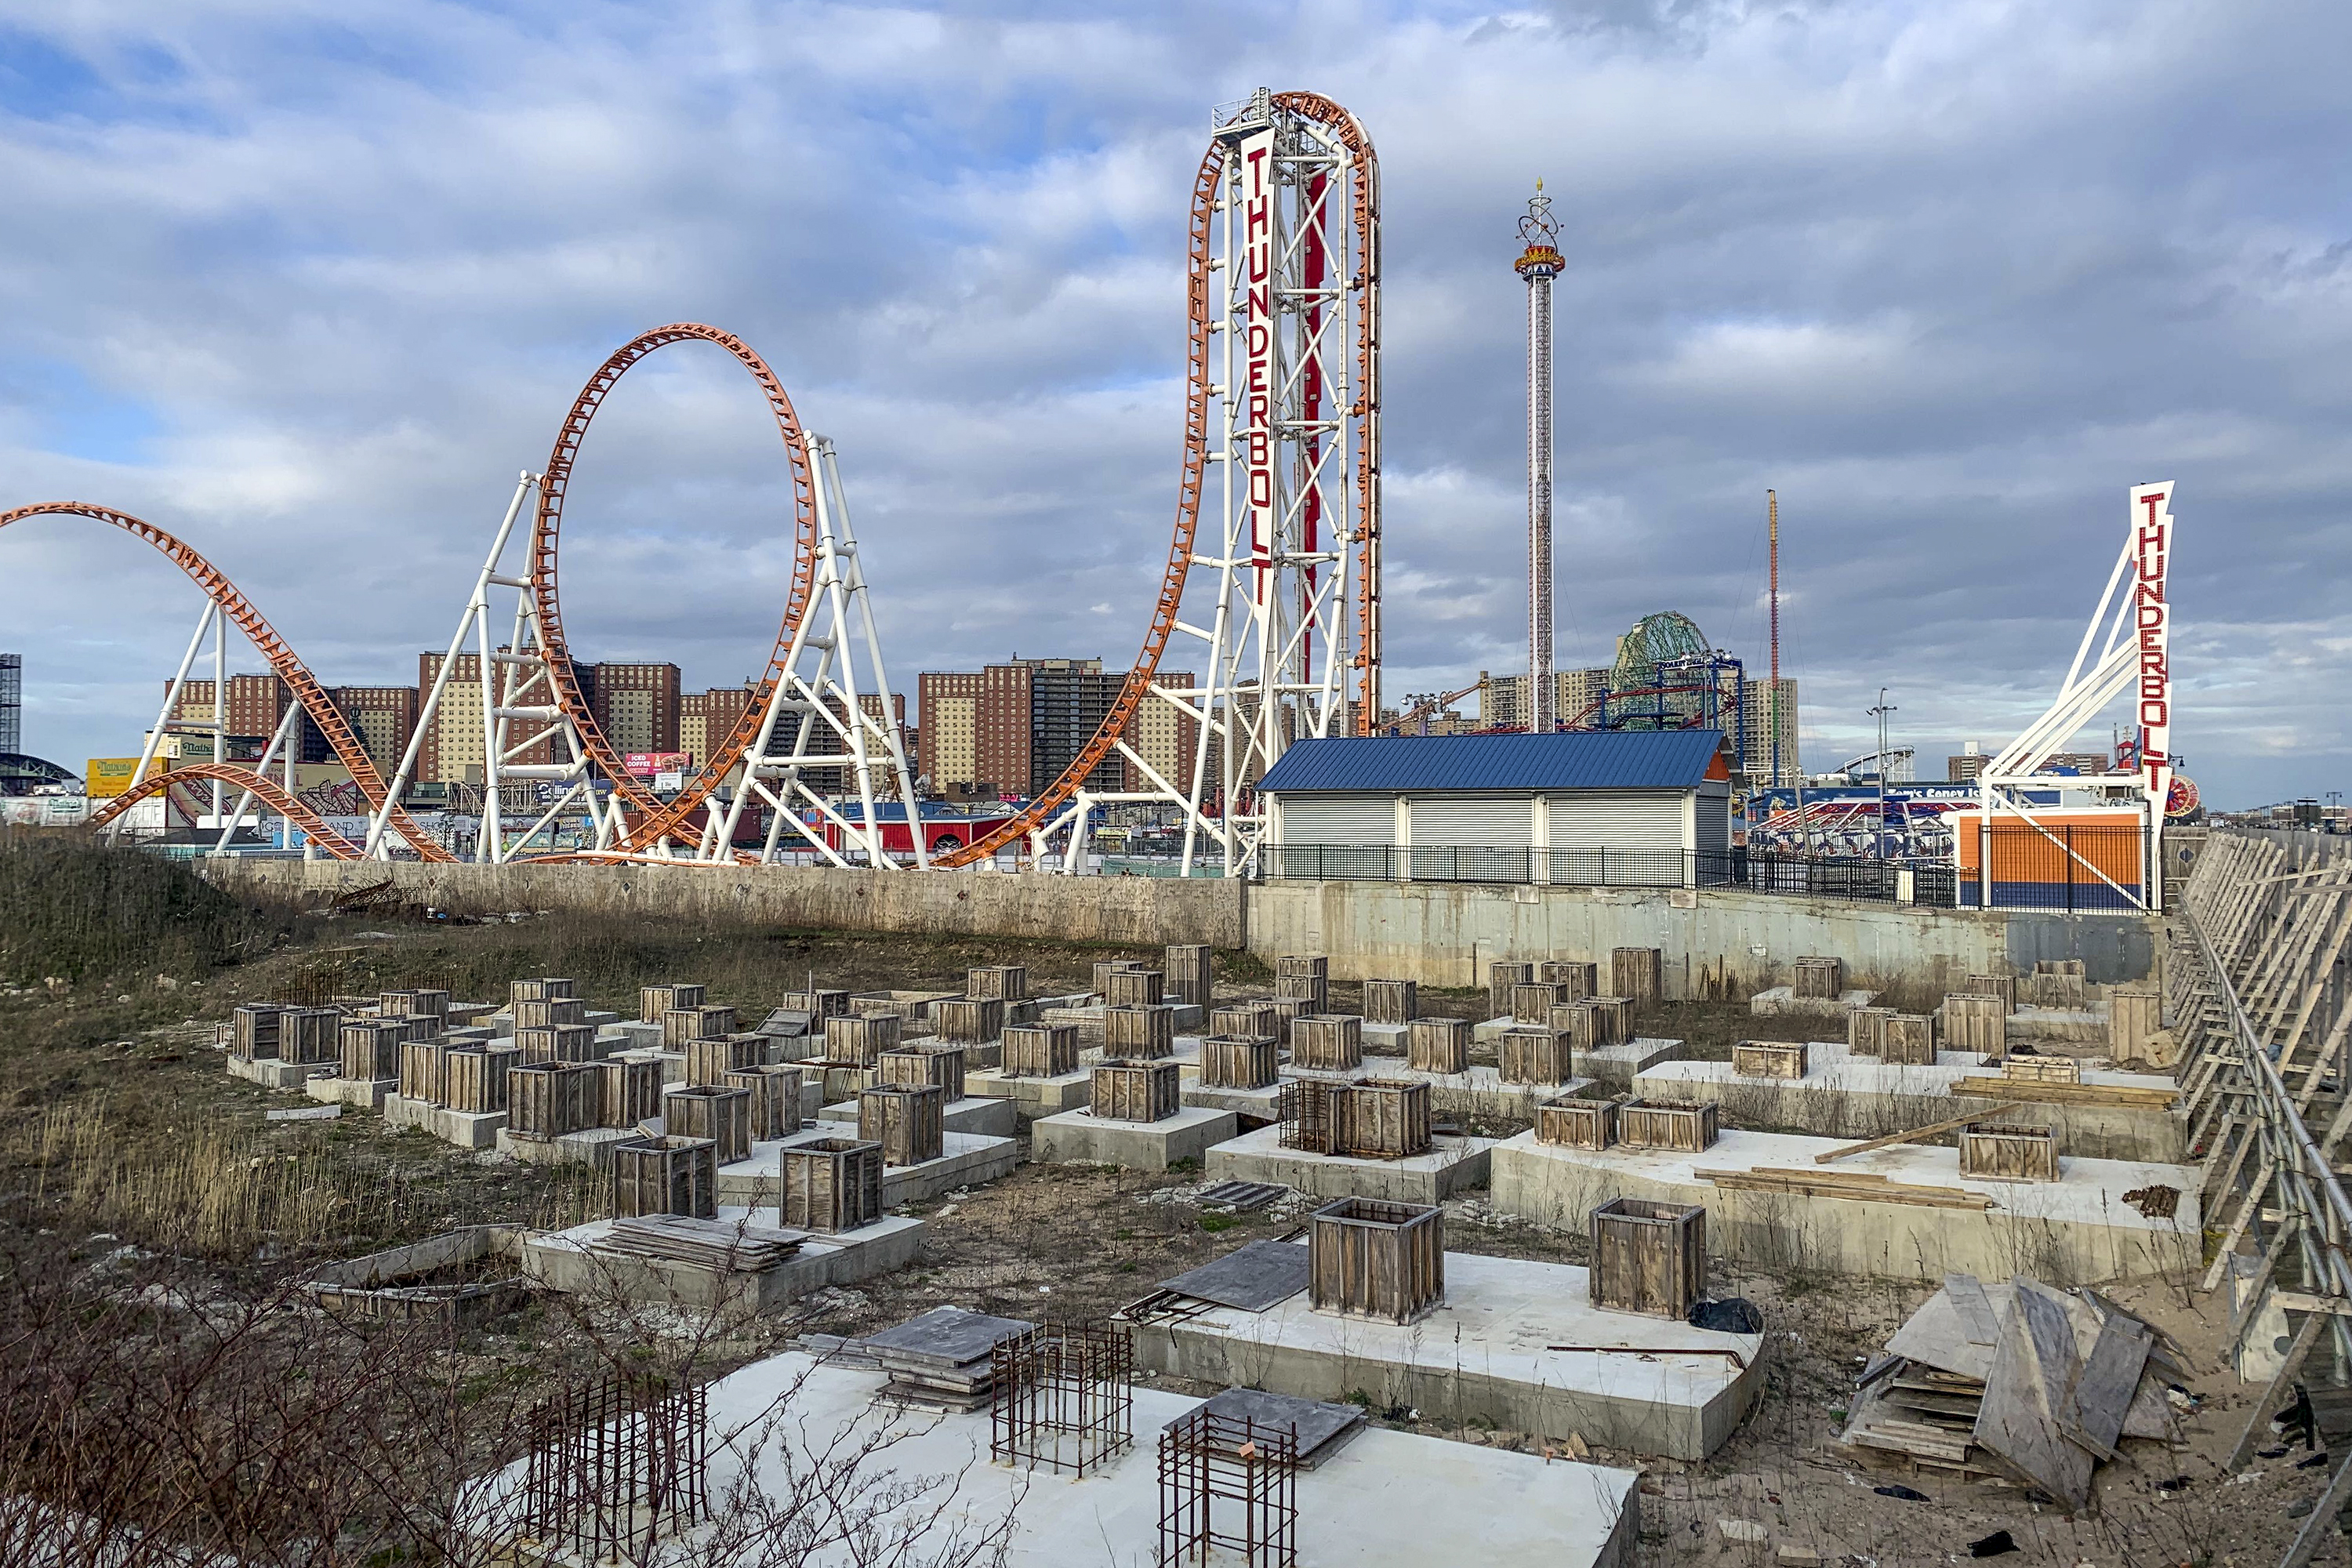 The site of the Coney Island amusement district expansion, next to the Thunderbolt ride.